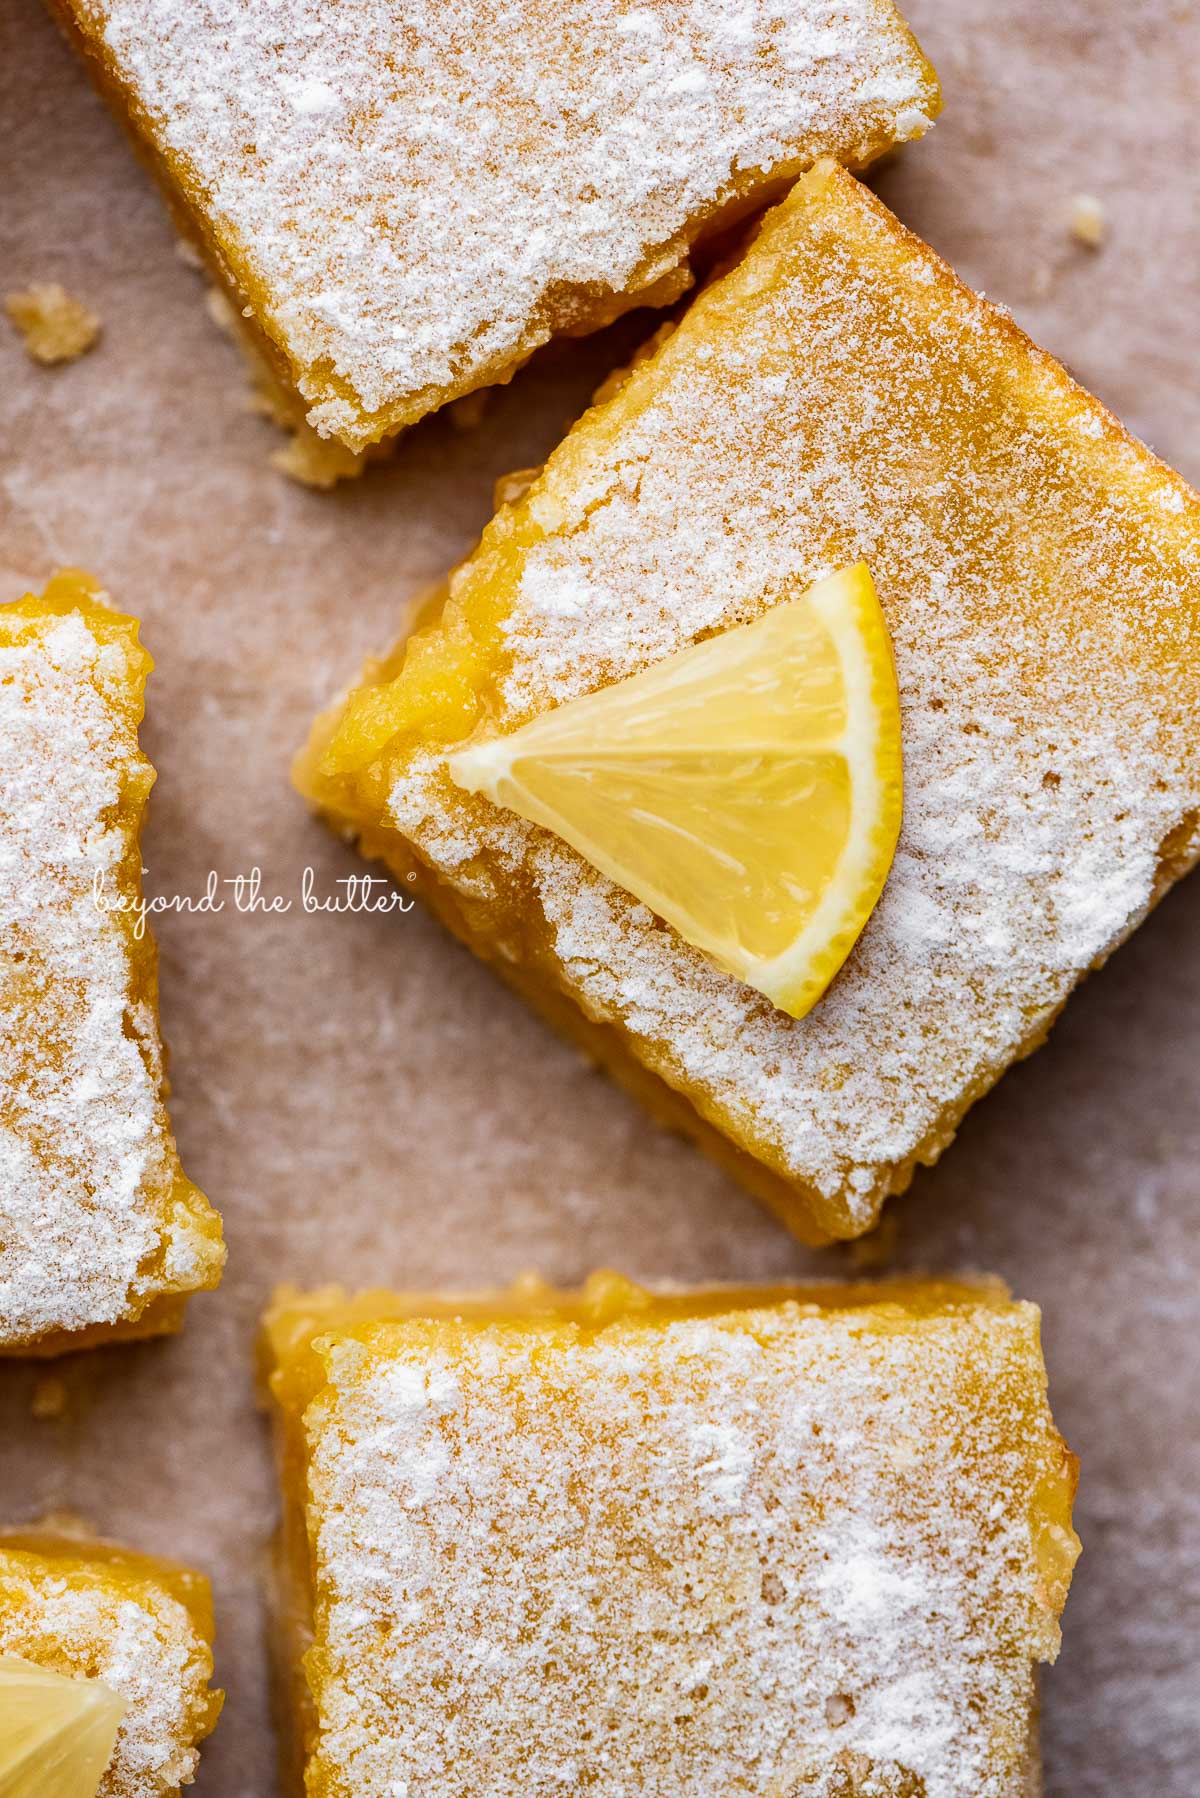 Tart and tangy lemon bars on parchment paper | © Beyond the Butter®